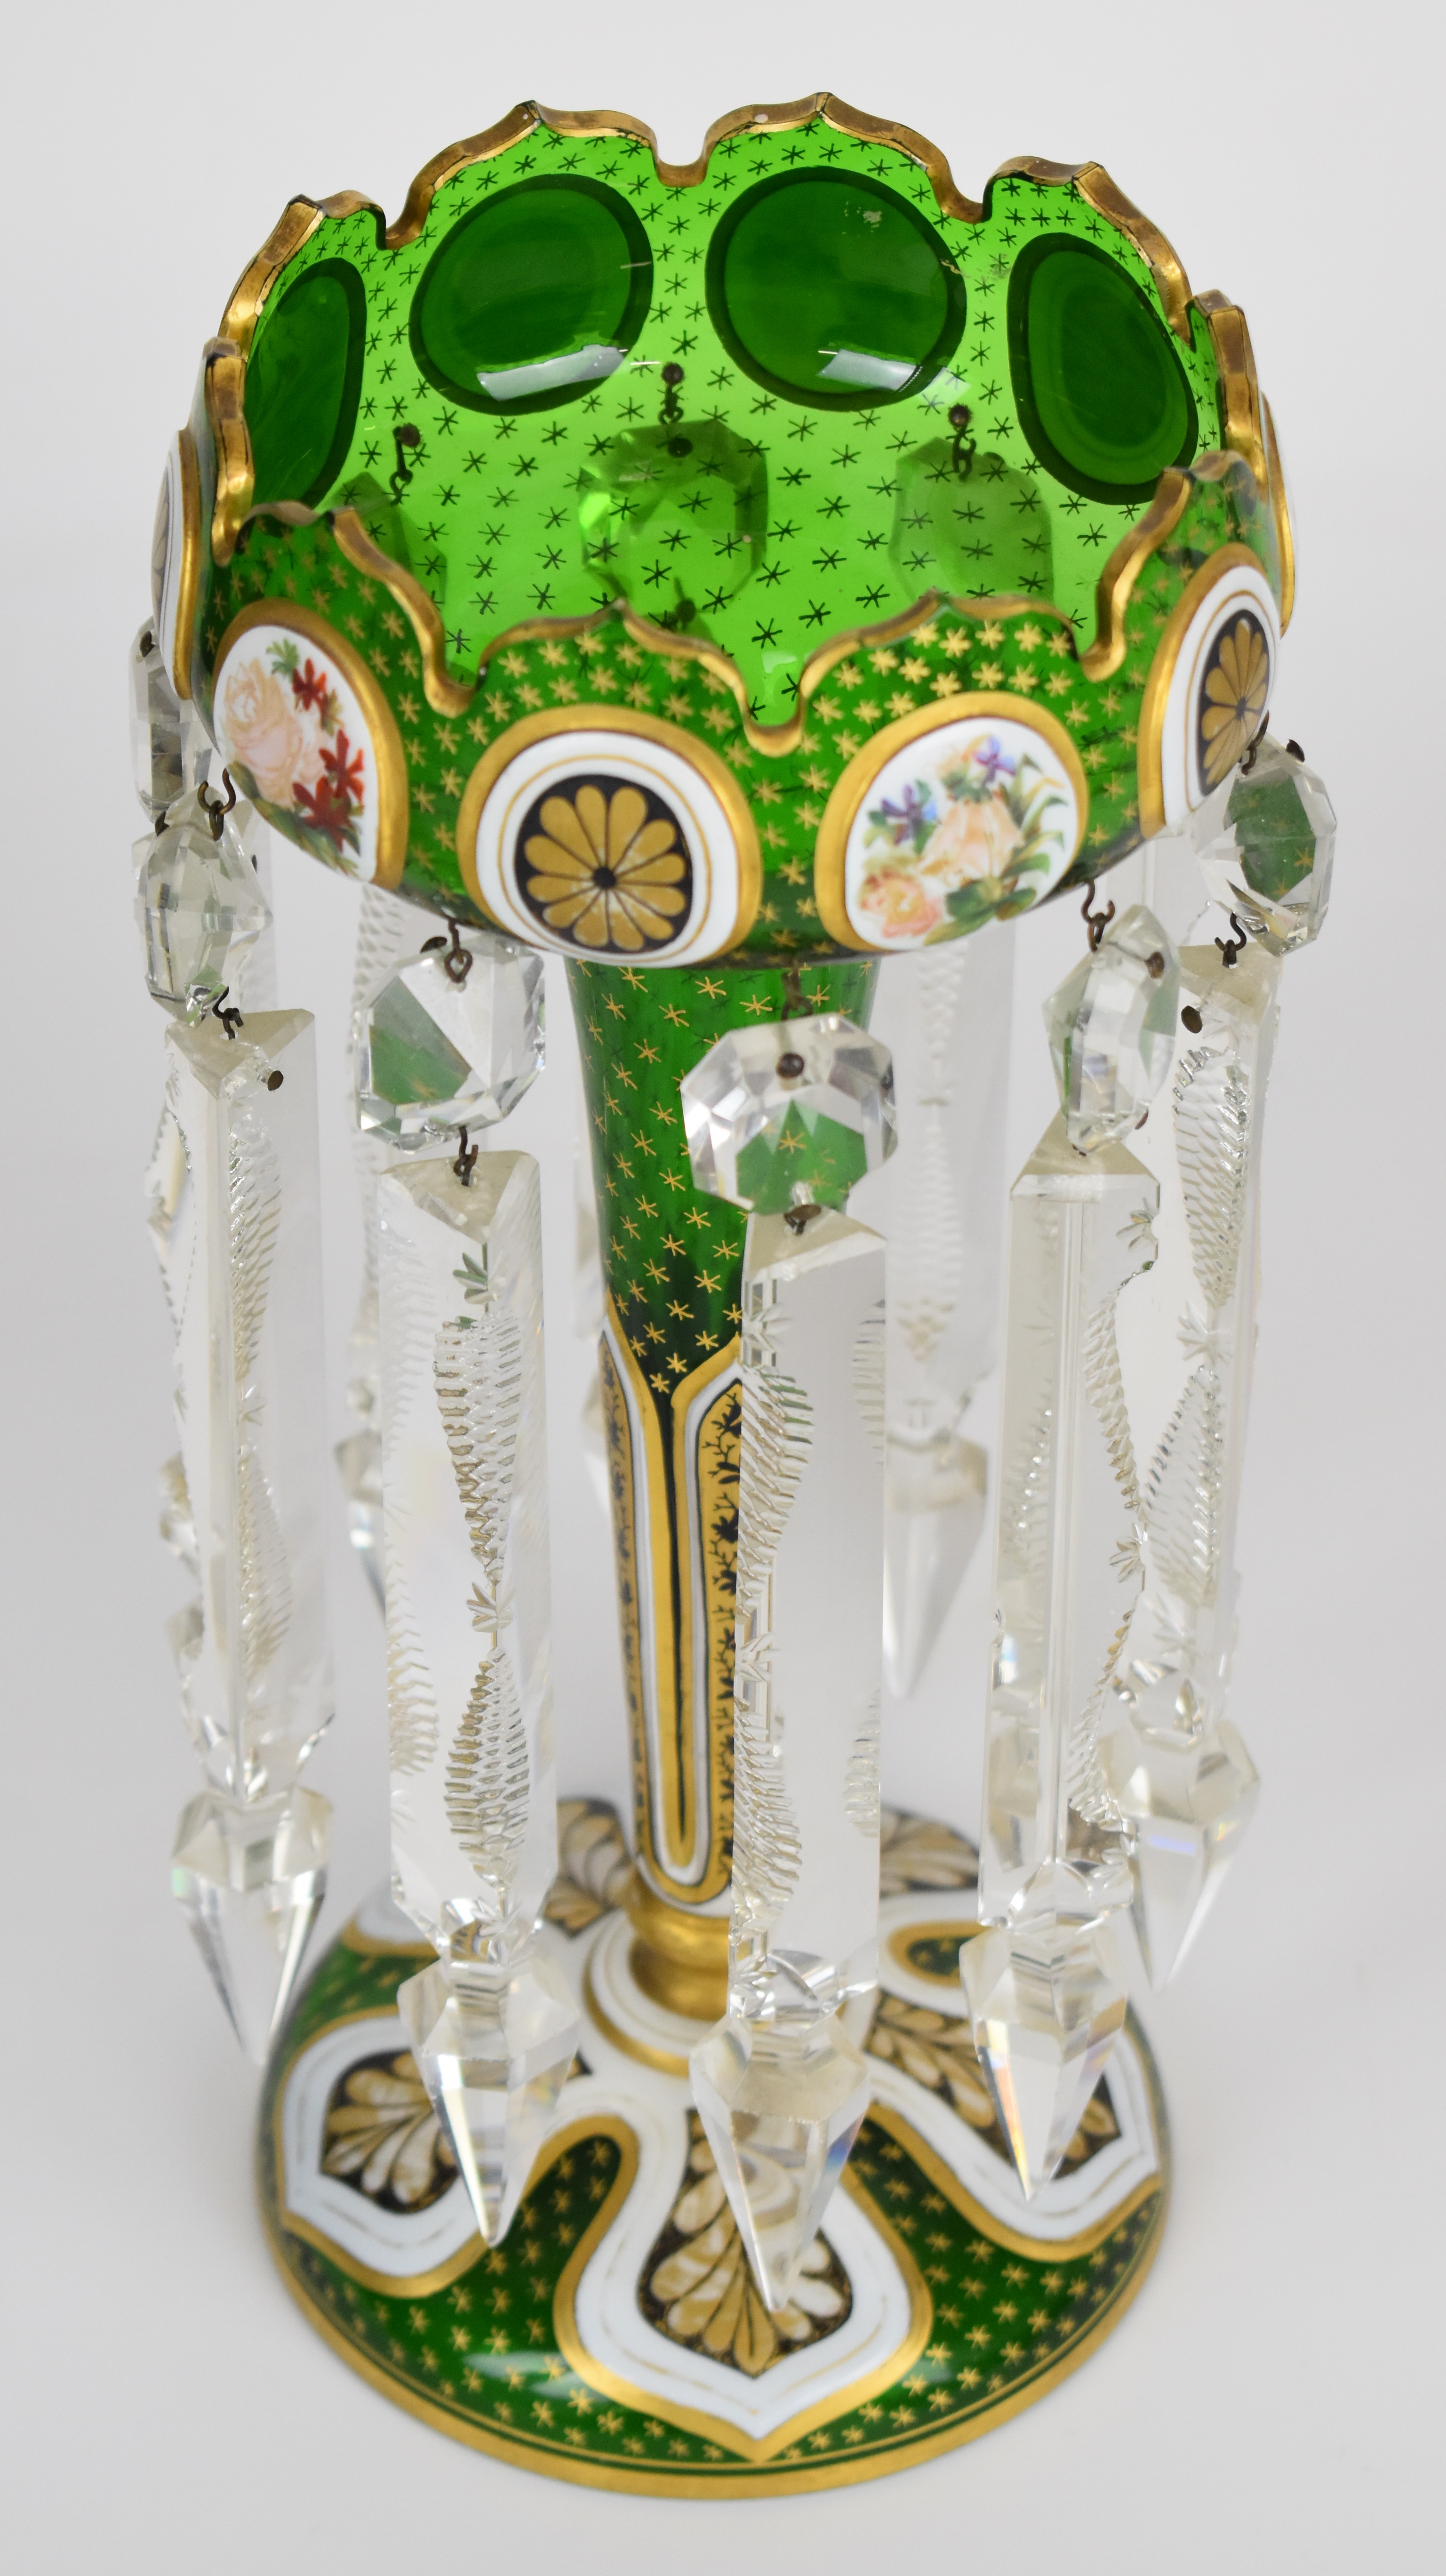 Victorian overlaid glass lustre vase with floral and gilt decoration over a green ground and clear - Image 5 of 6